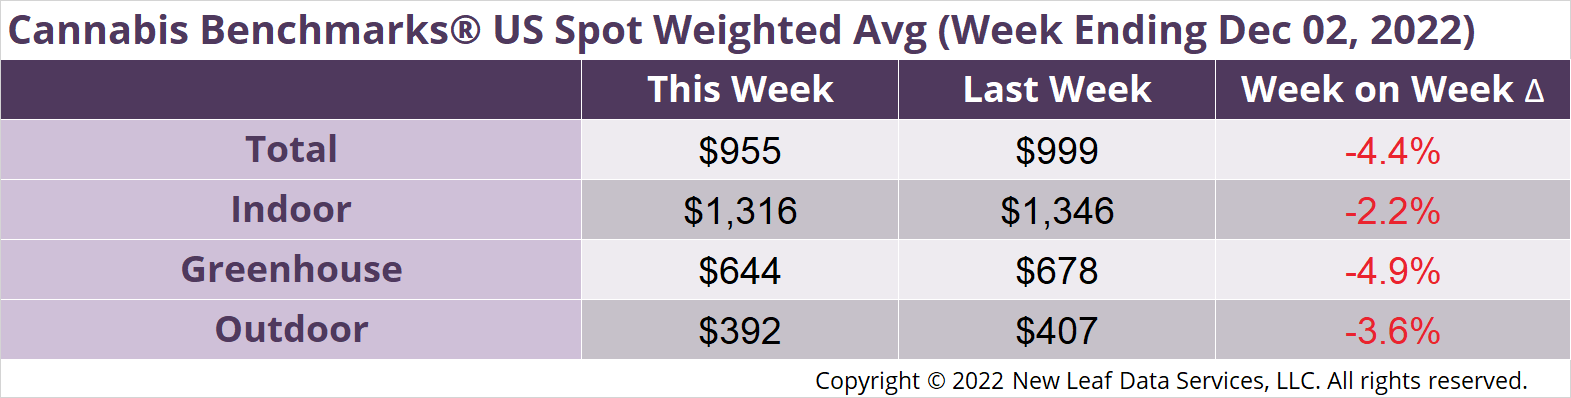 Cannabis Benchmarks U.S. Spot Weighted Average Prices December 2, 2022